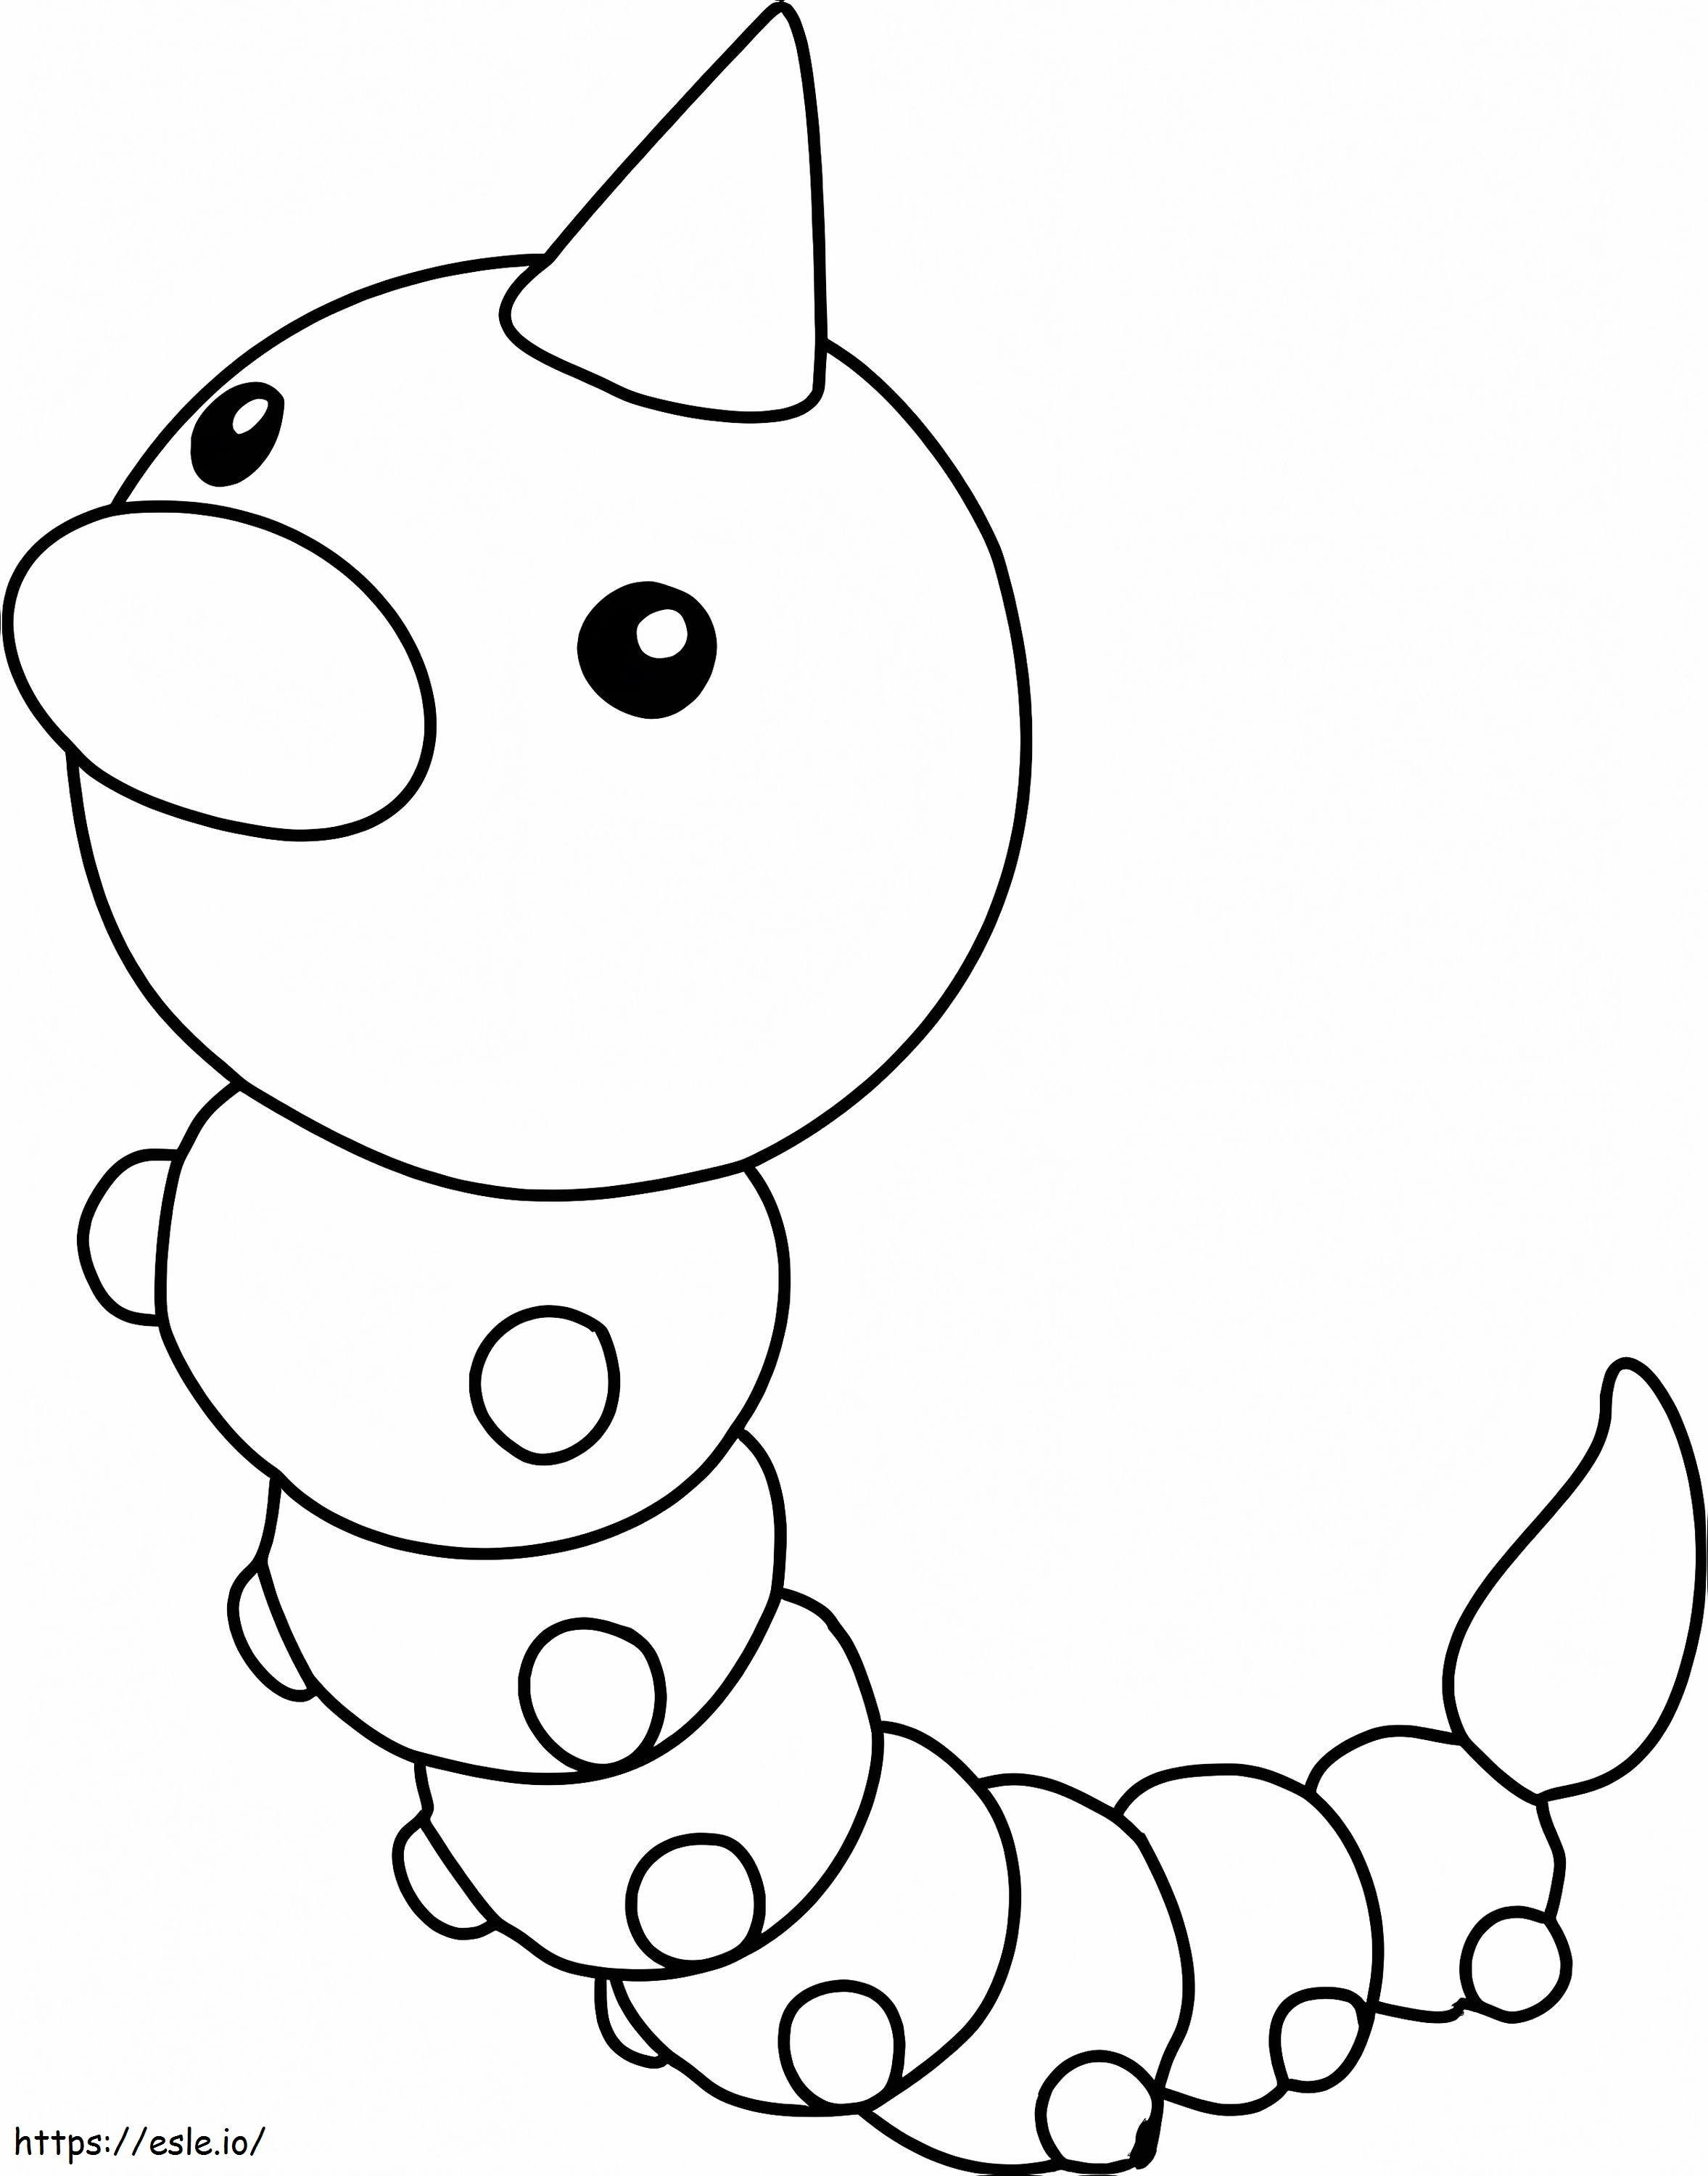 Weedle 2 coloring page